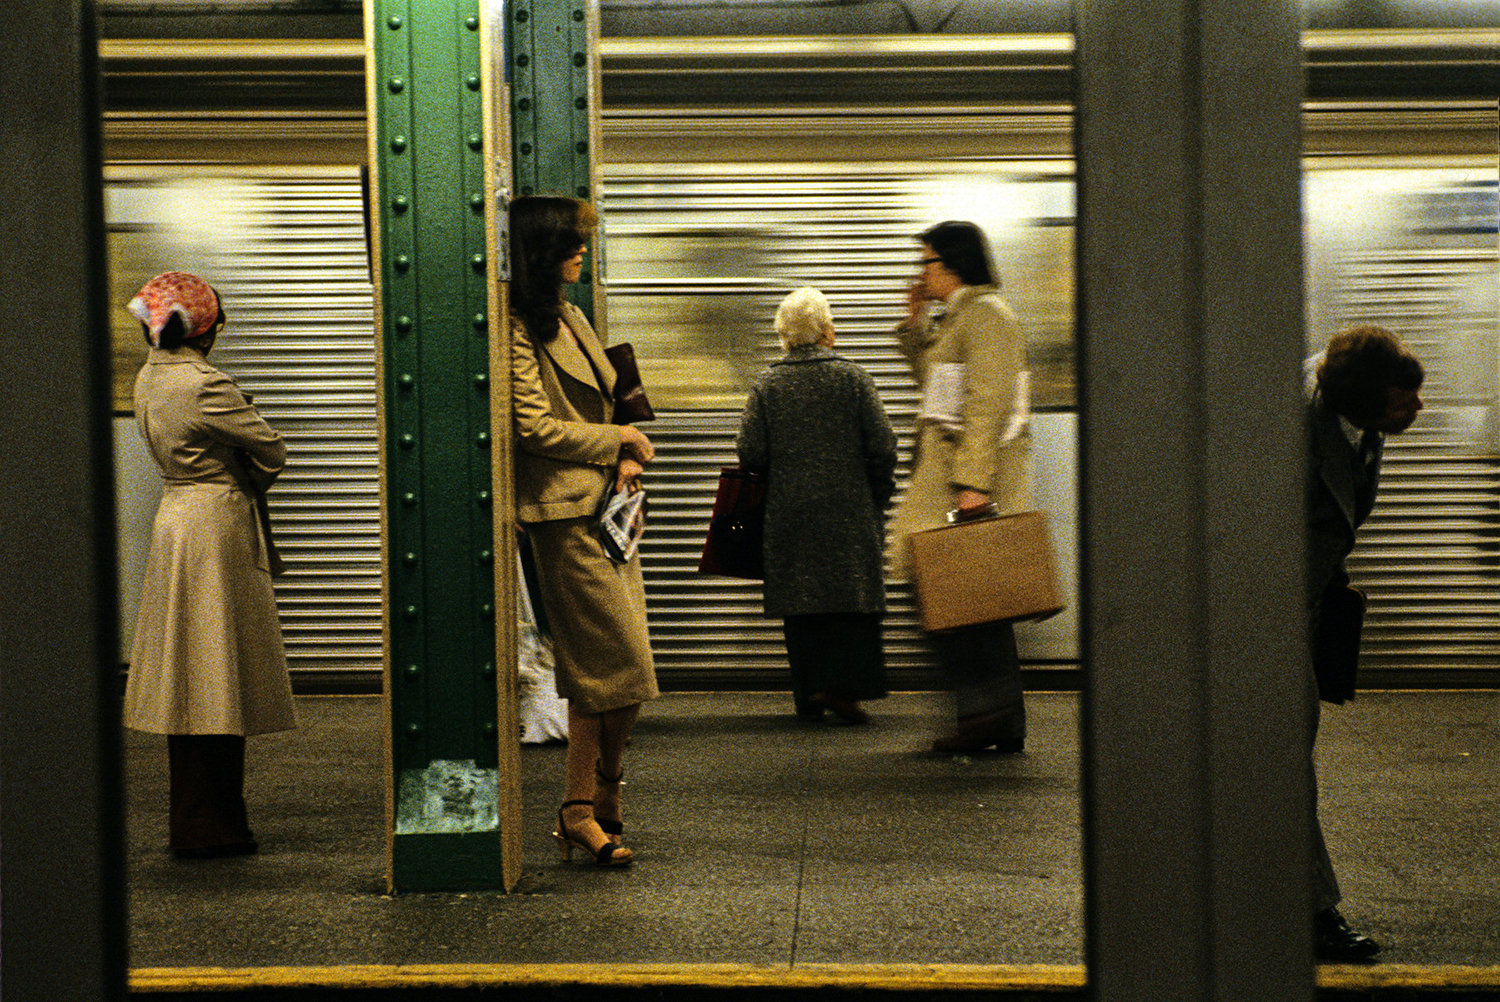 Grand Central Station, Subway New York, 1983